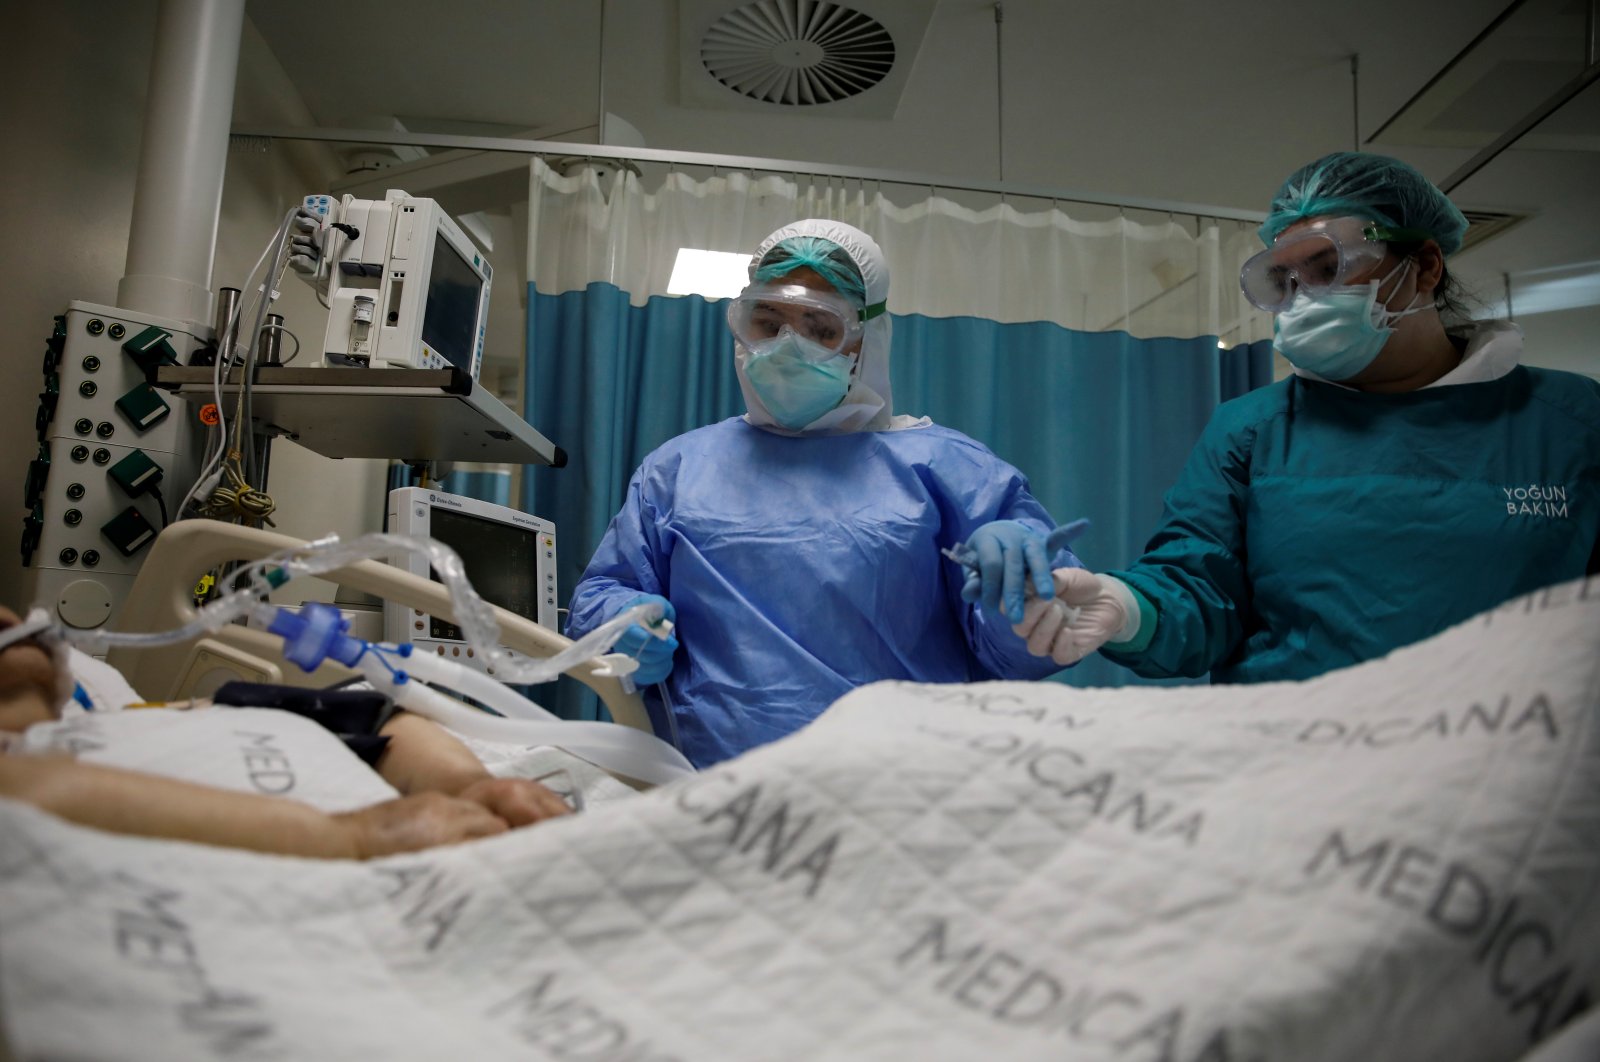 Nurses take care of a patient suffering from COVID-19 at an intensive care unit at Medicana International Hospital in Istanbul, Turkey, April 14, 2020. (Reuters Photo)